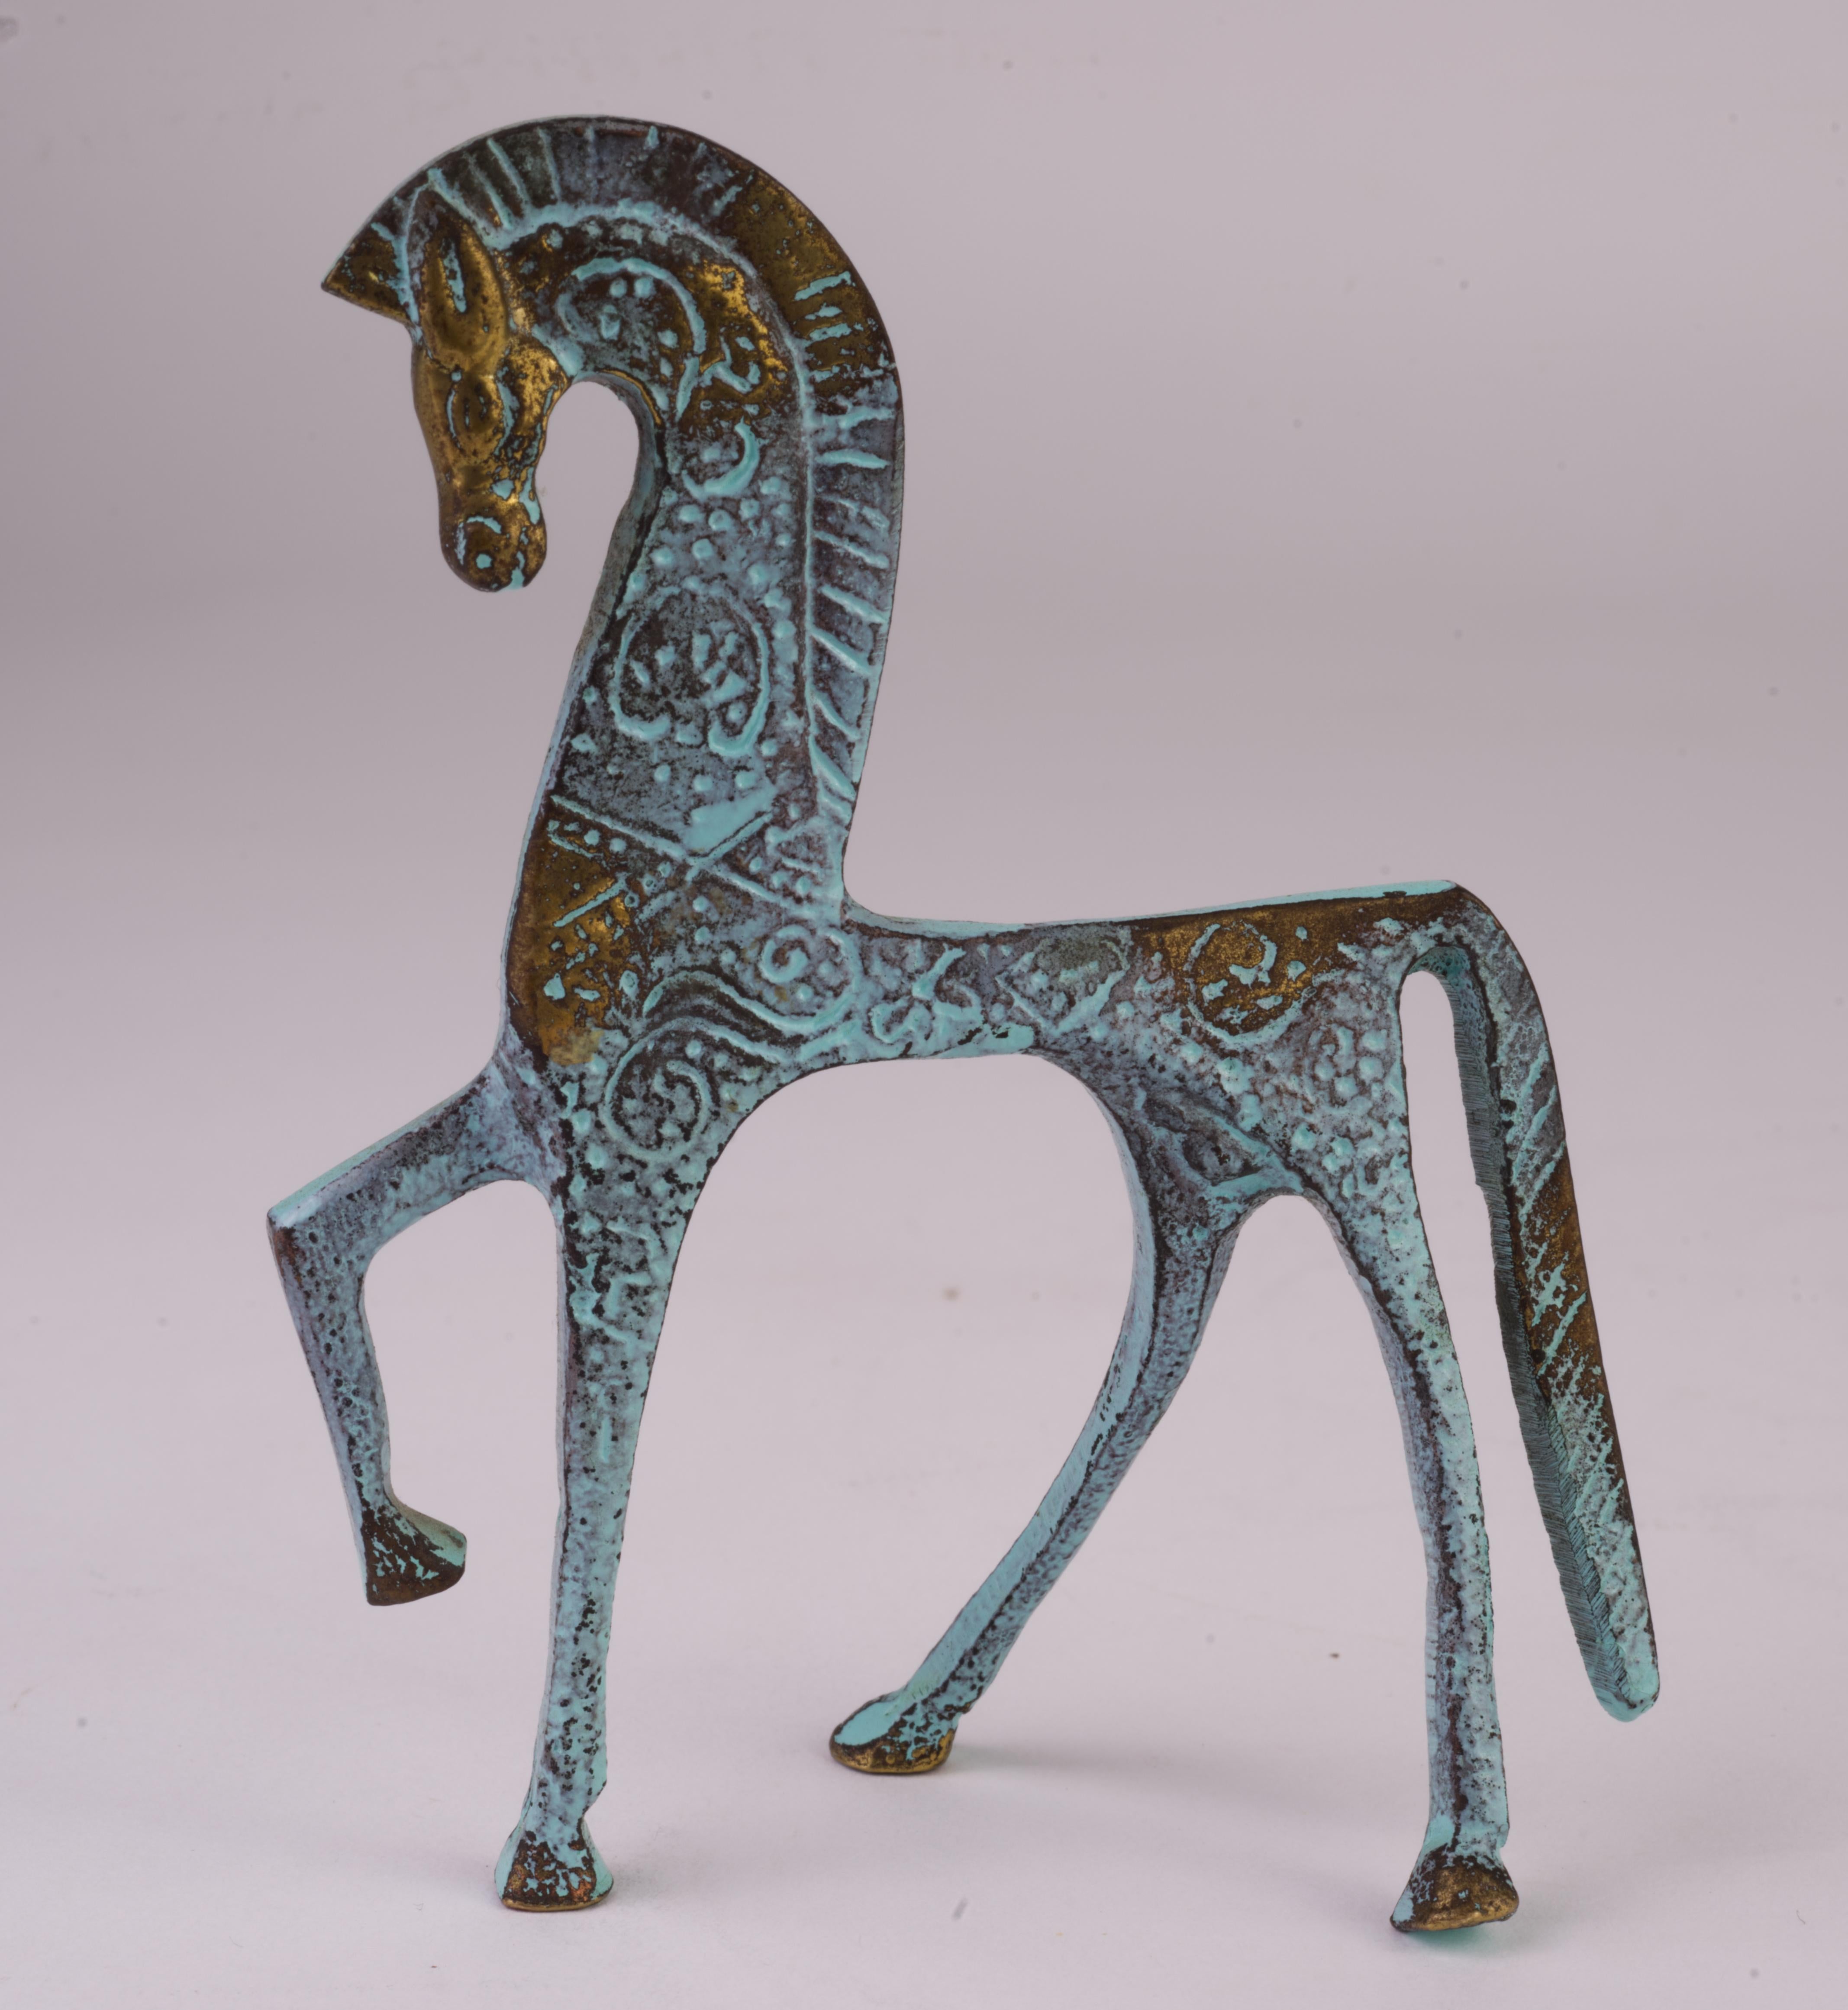  Vintage small Etruscan horse cast bronze figurine in the style of Frederick Weinberg is decorated with complex detailed etchings along the horse's body that are emphasized by strategic use of enamel, creating an antiquated impression. The etchings